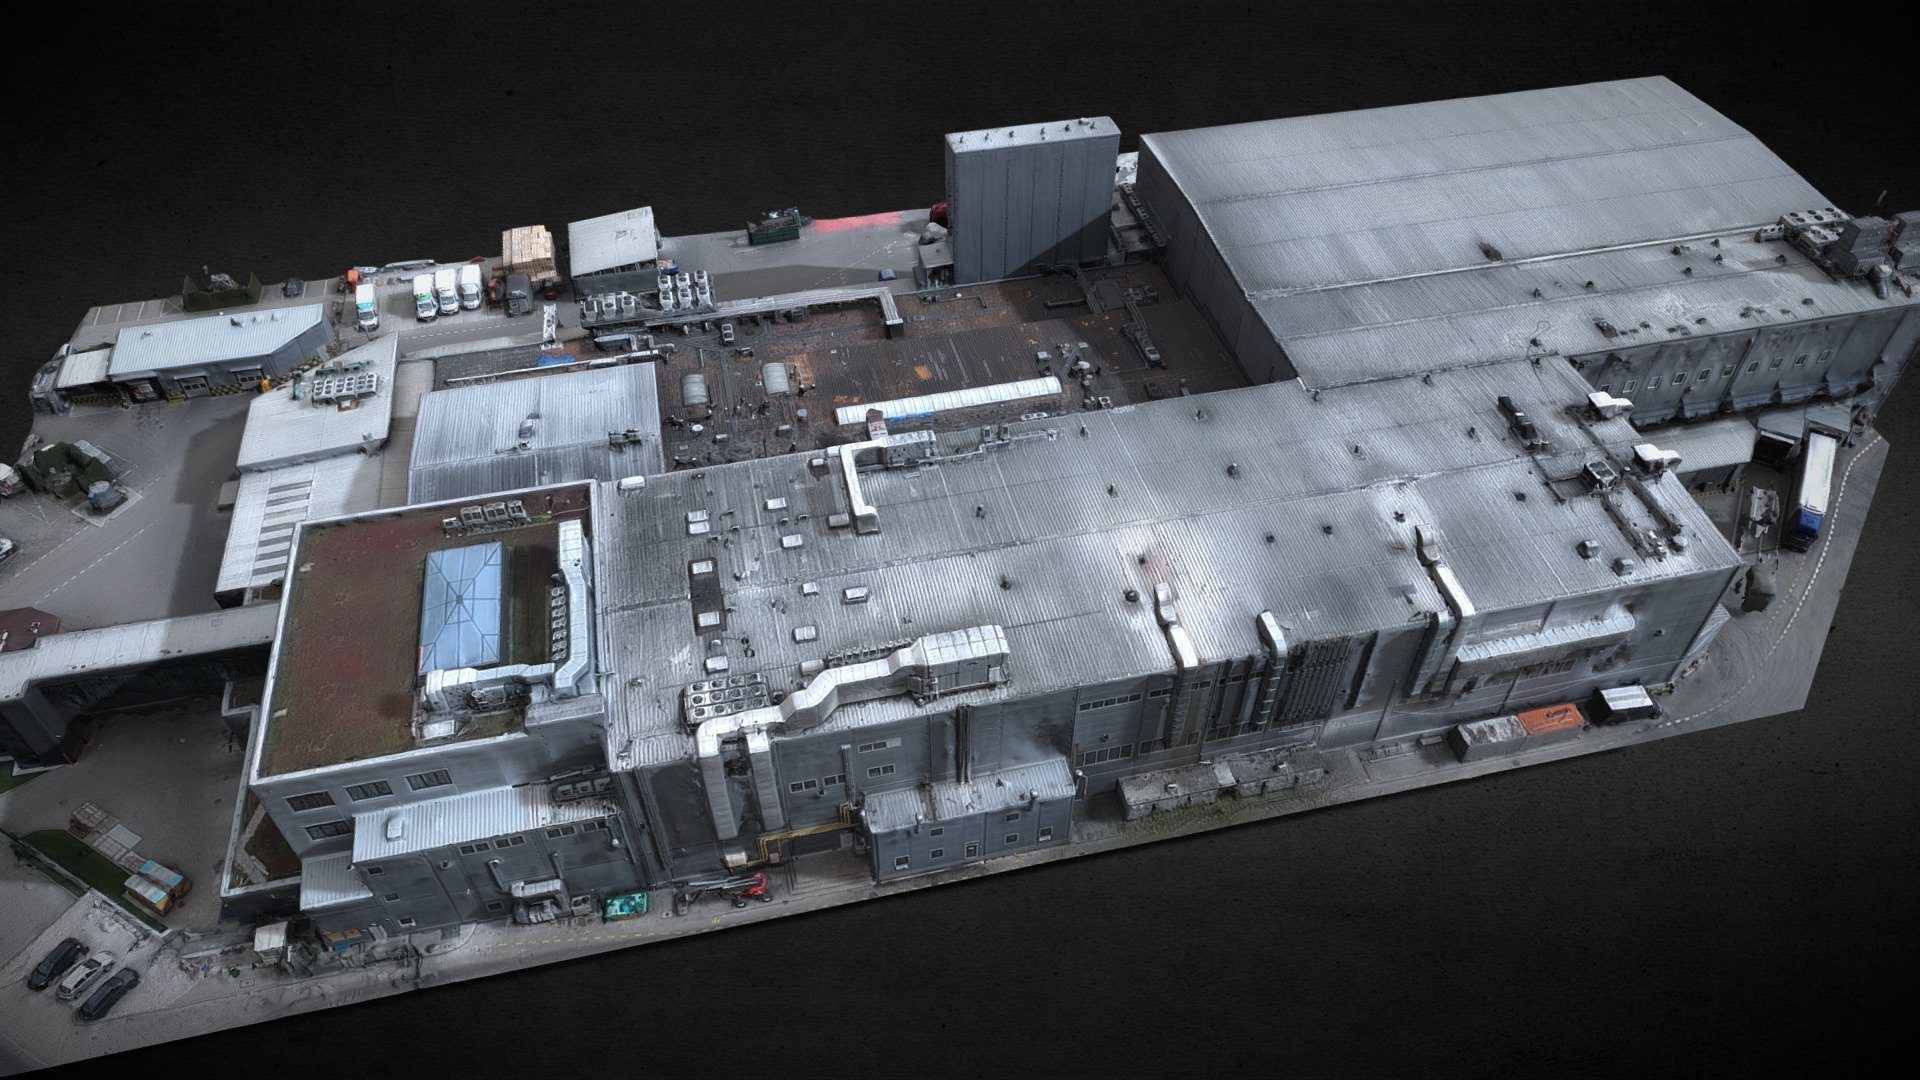 factory industrial photoscan DJI mavic 3 drone
DJI Mavic 3 drone - photogrammetry building &amp; environment
maps 8k: diffuse
maps 4k: roughness, nrm, bump, ao
textures link
cleaned geometry, no retopology - Industrial Factory DJI Mavic3 aerial photoscan - Buy Royalty Free 3D model by looppy 3d model